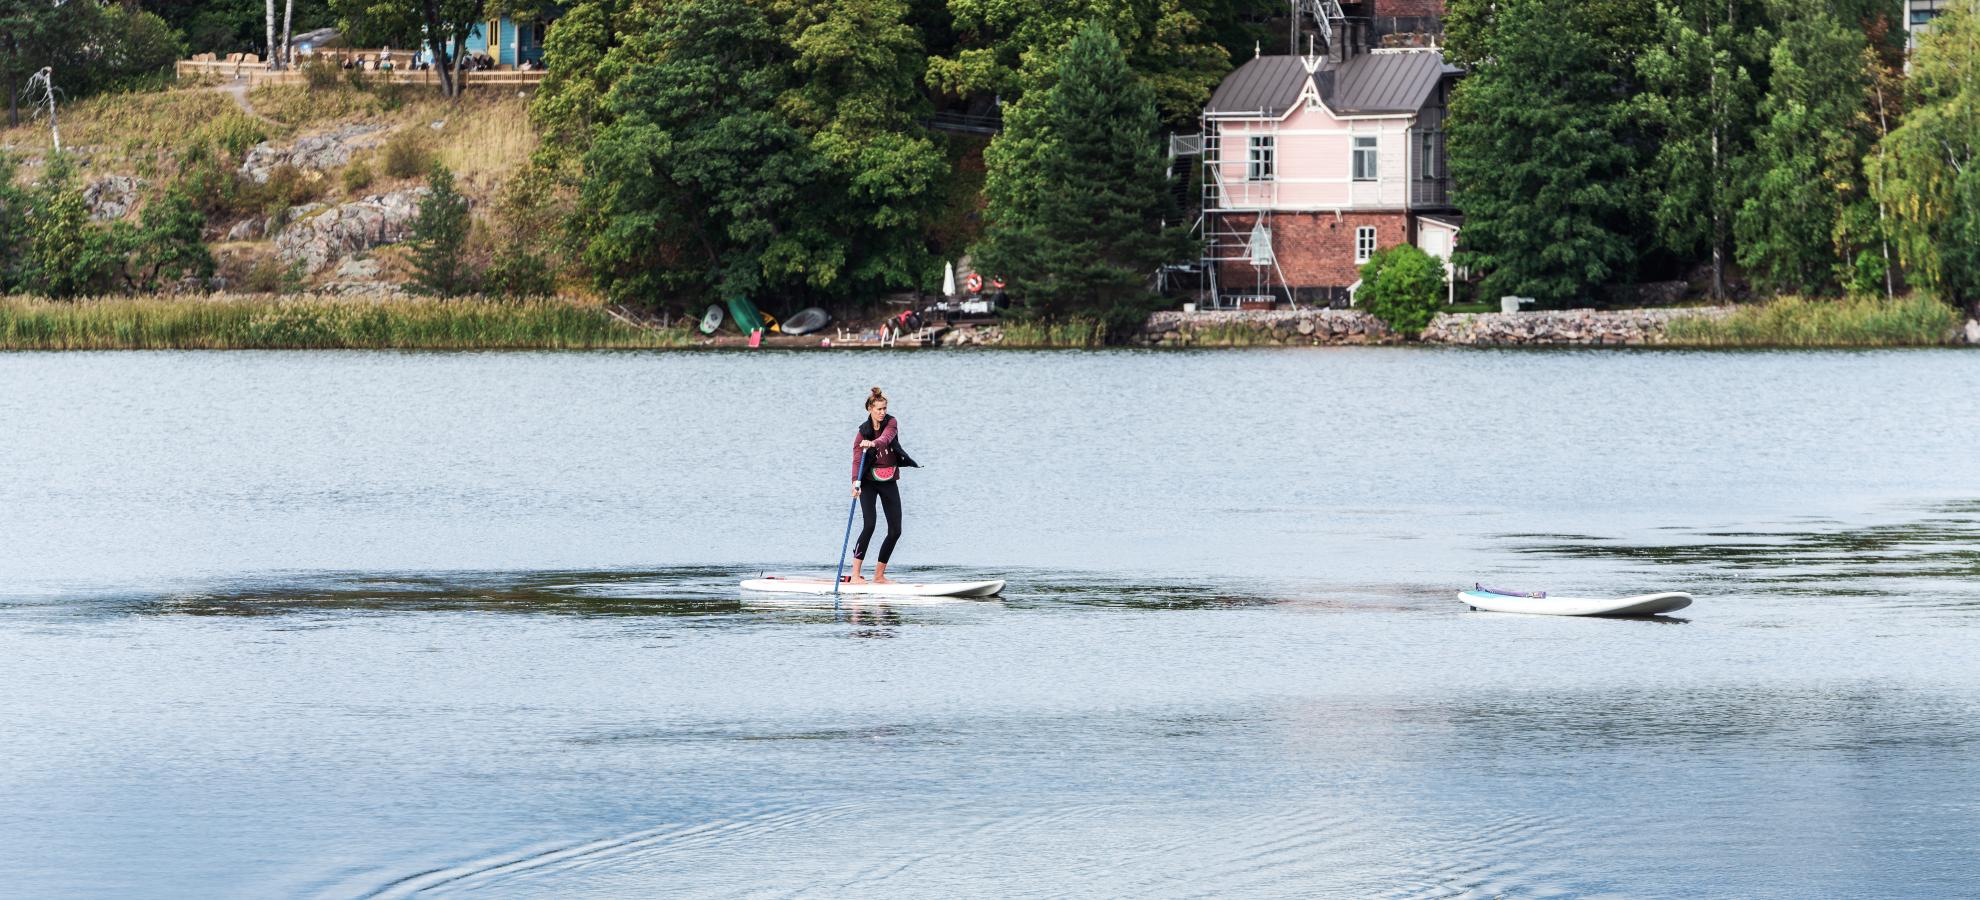 With three ducks swimming in the foreground, a woman paddles on a SUP board across Töölönlahti. The shoreline can be seen behind her, where a house stands surrounded by trees. 